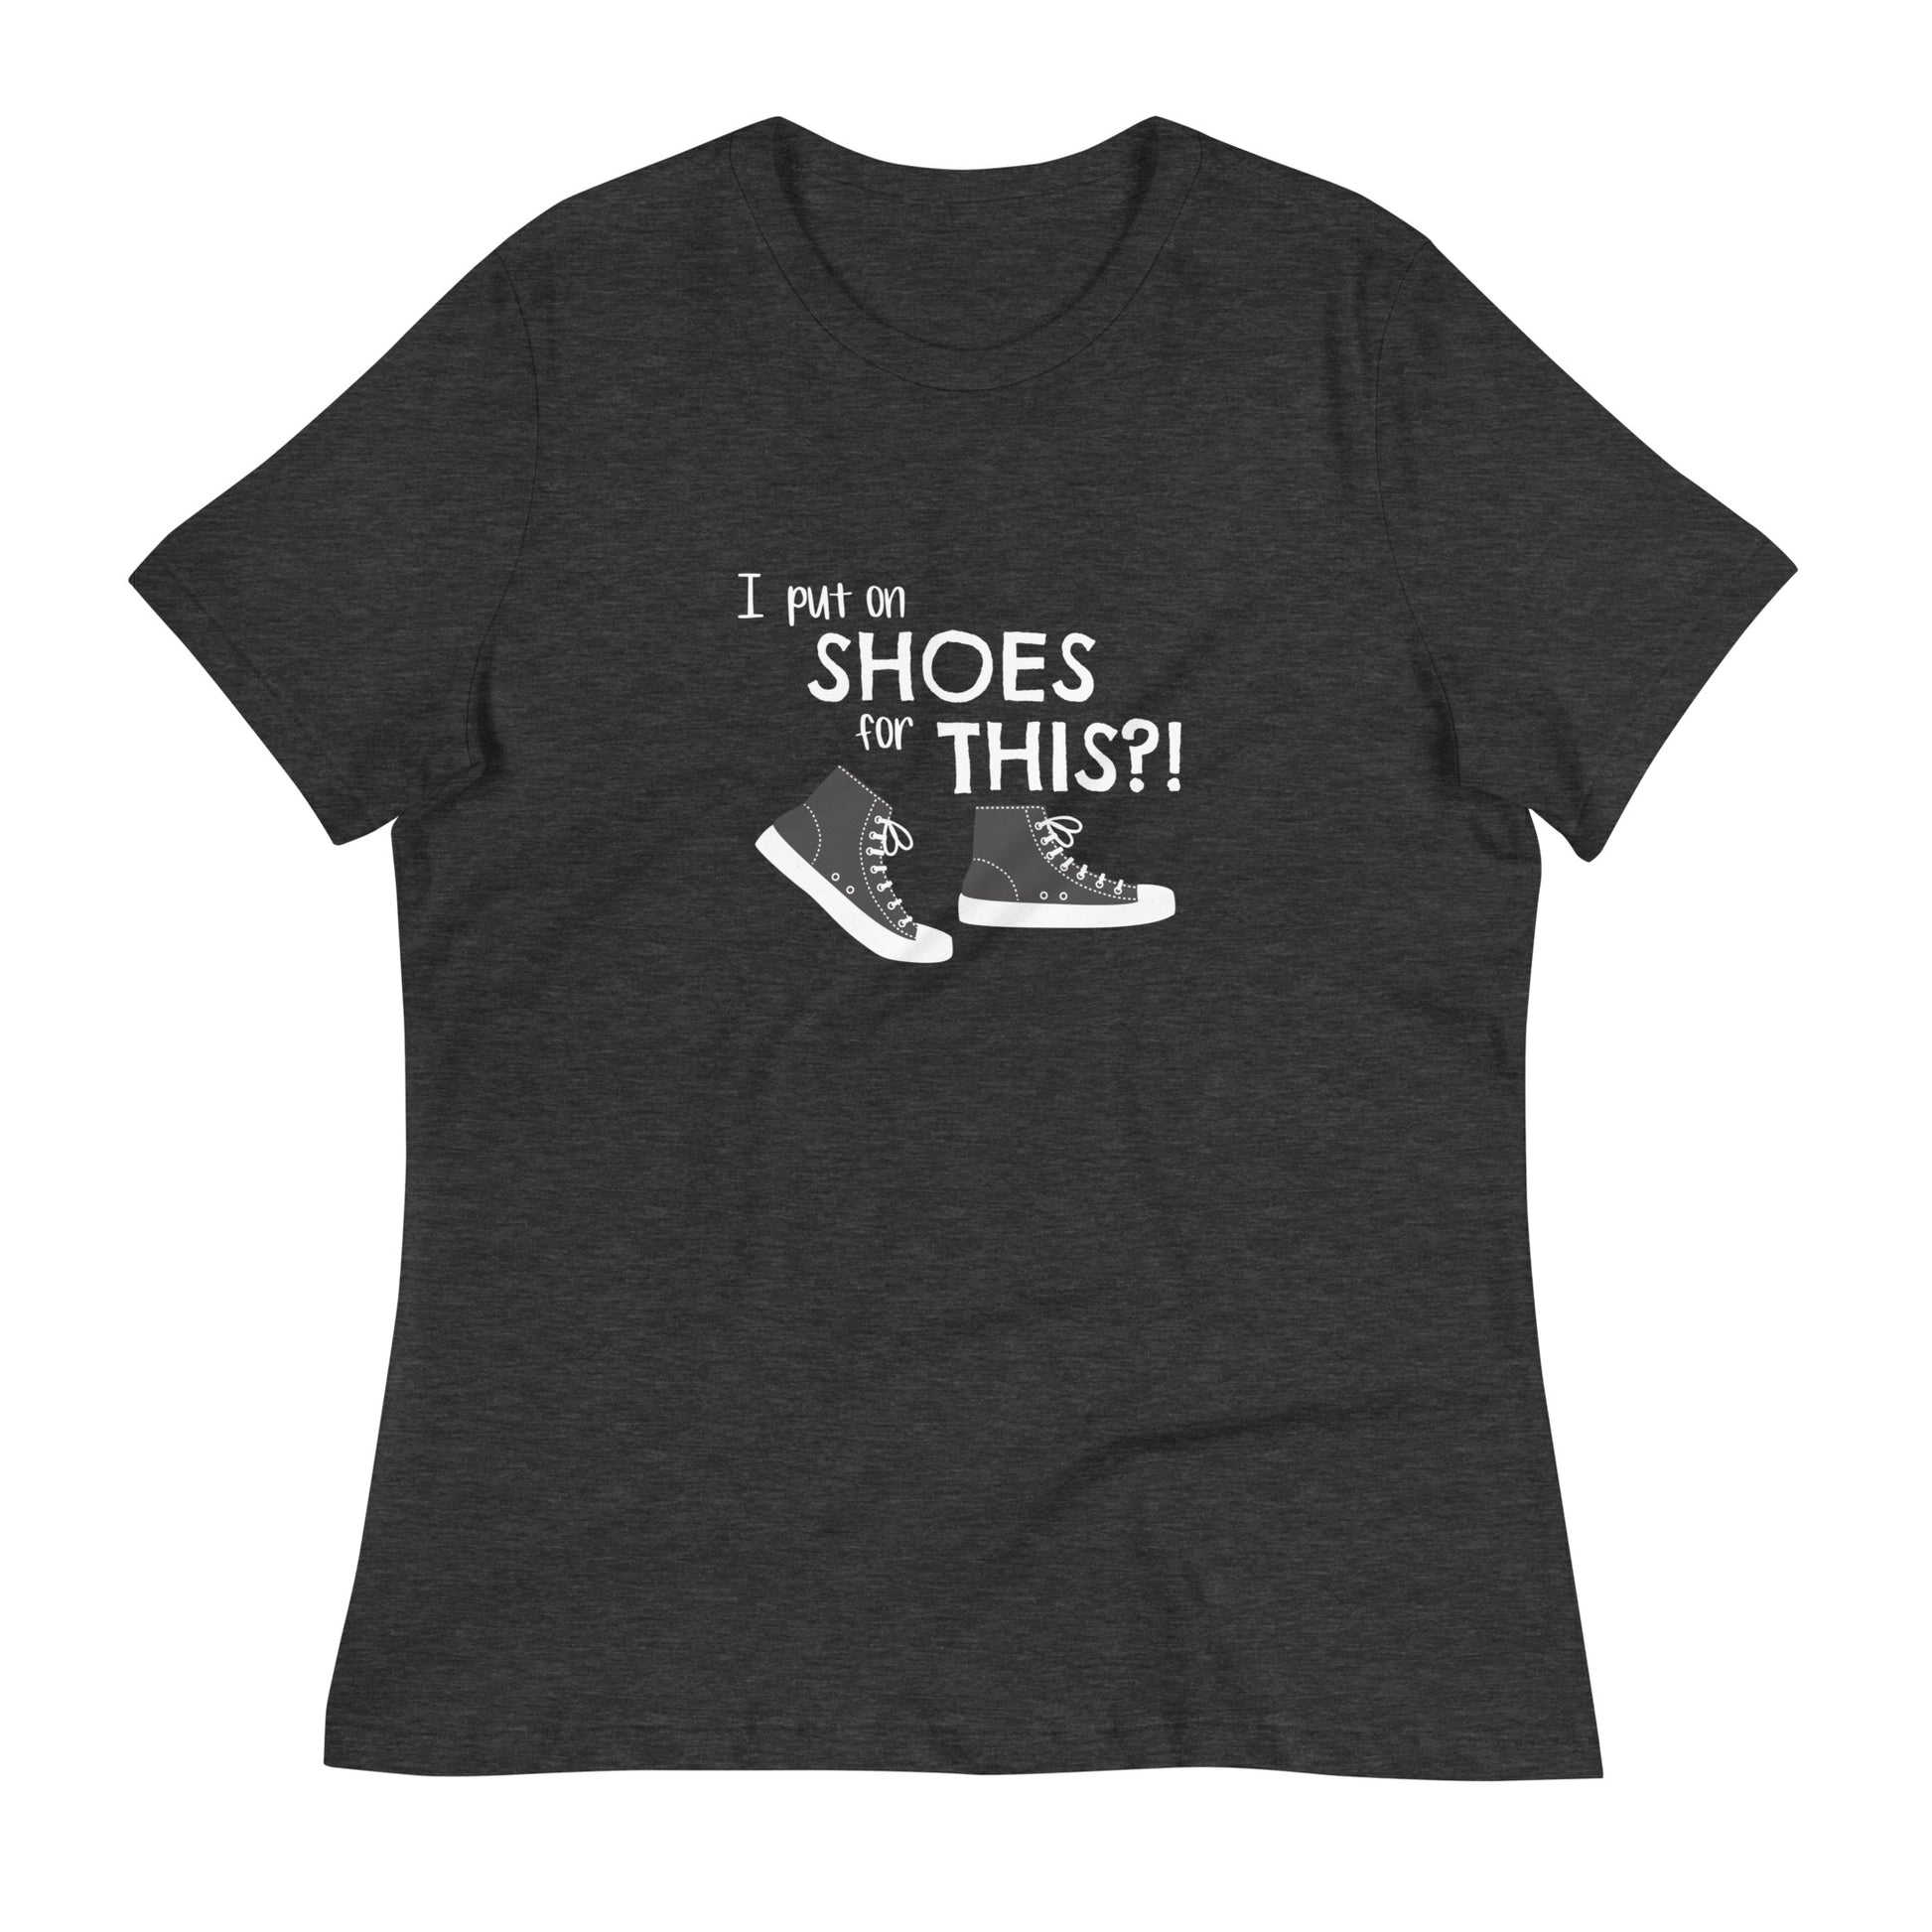 Dark Grey Heather women's relaxed fit t-shirt with graphic of black and white canvas "chuck" sneakers and text: "I put on SHOES for THIS?!"